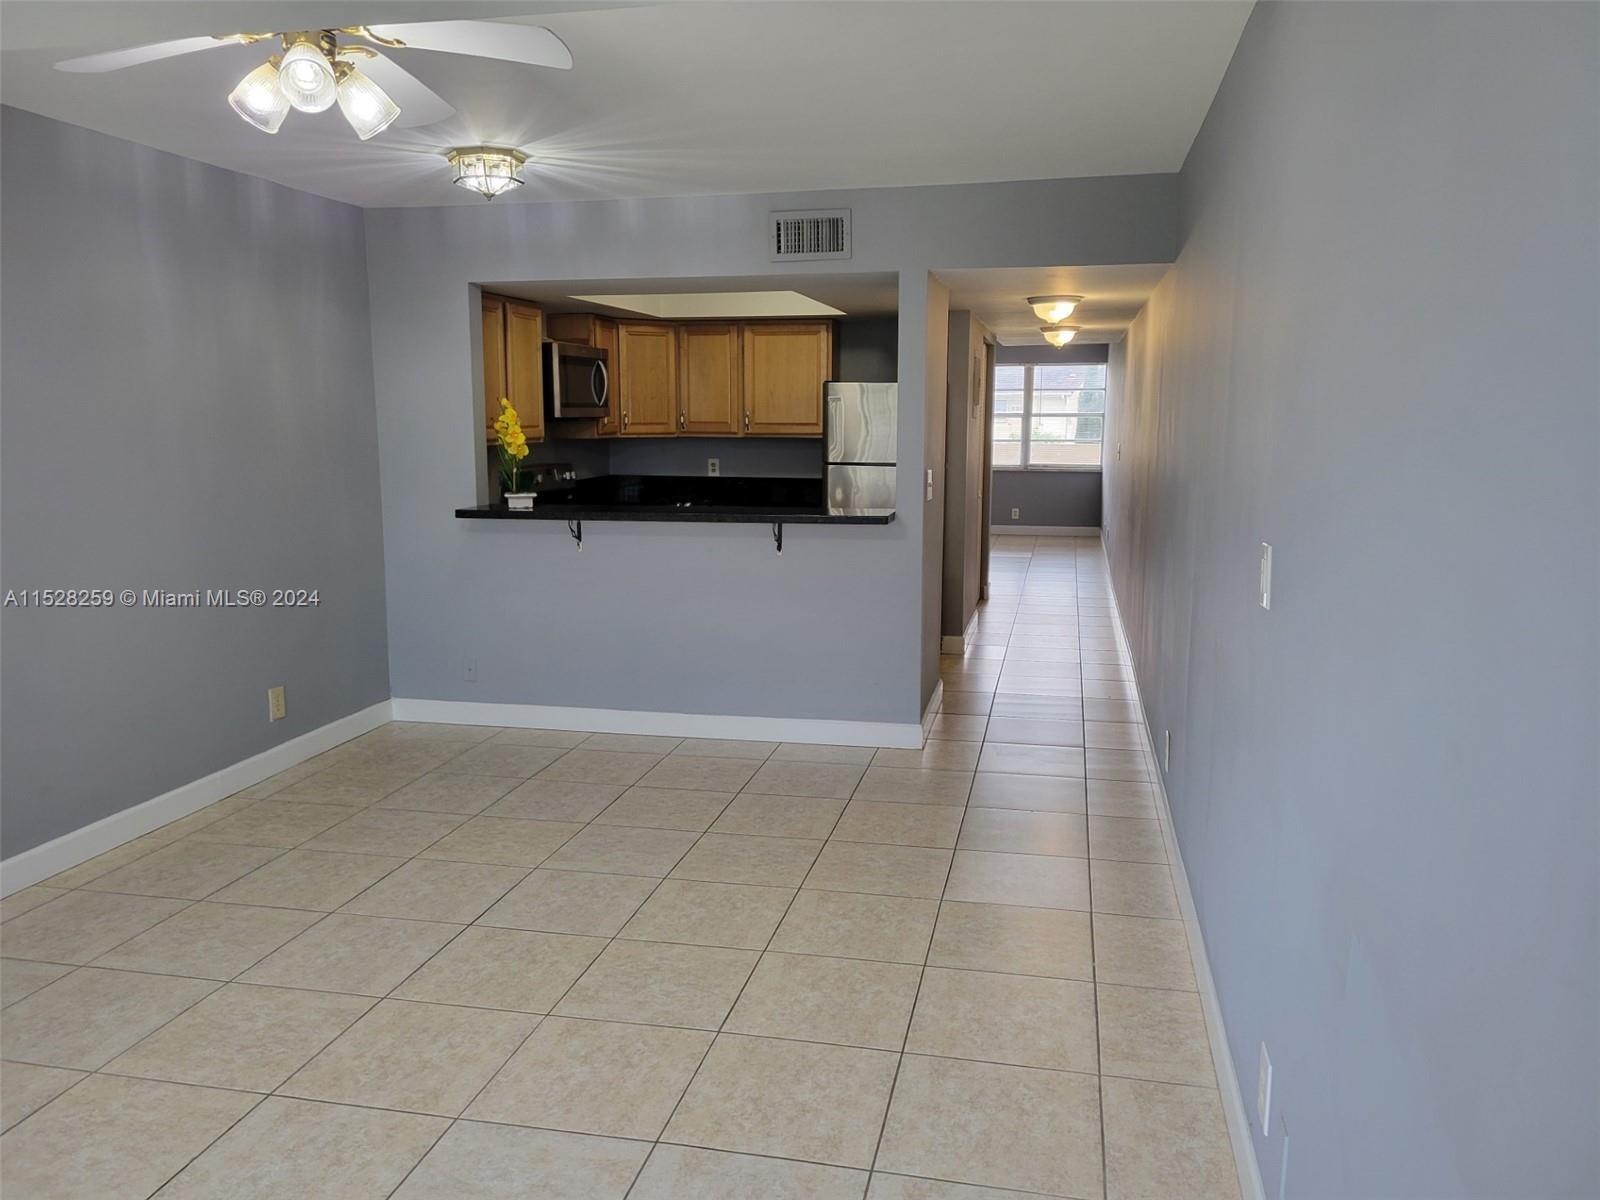 Prefect home. 2 Bedrooms, 2.5 bathrooms Spacious 1336 sq ft updated, freshly painted in neutral colo